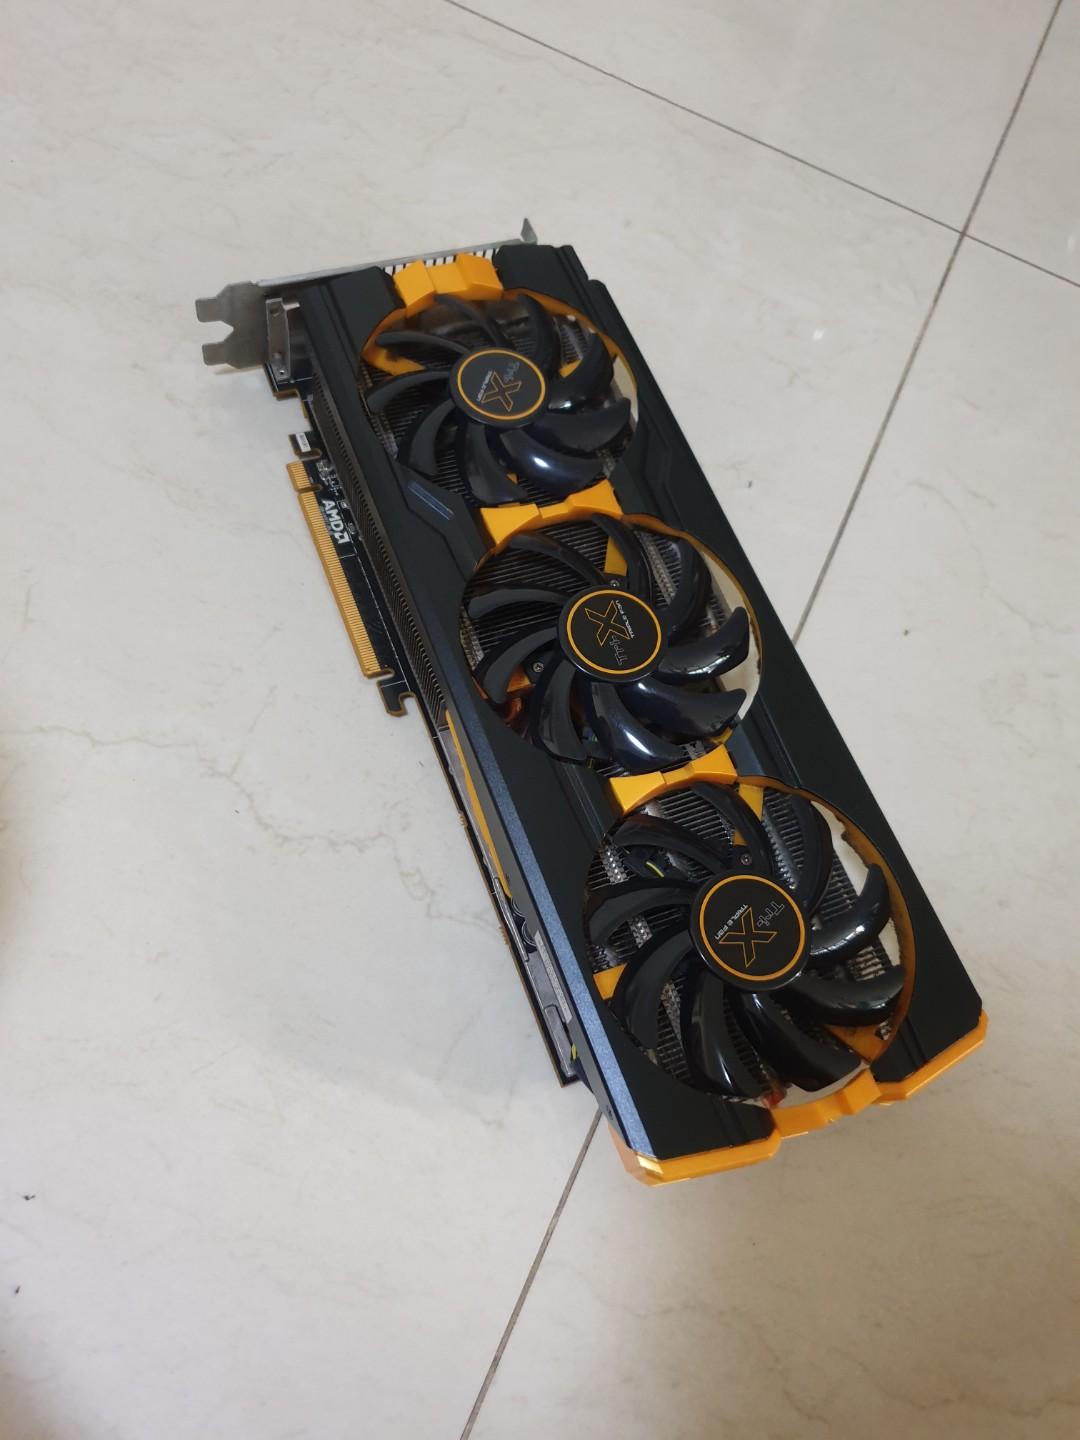 Sapphire Amd Radeon R9 290 Tri X 4gb Electronics Computer Parts Accessories On Carousell